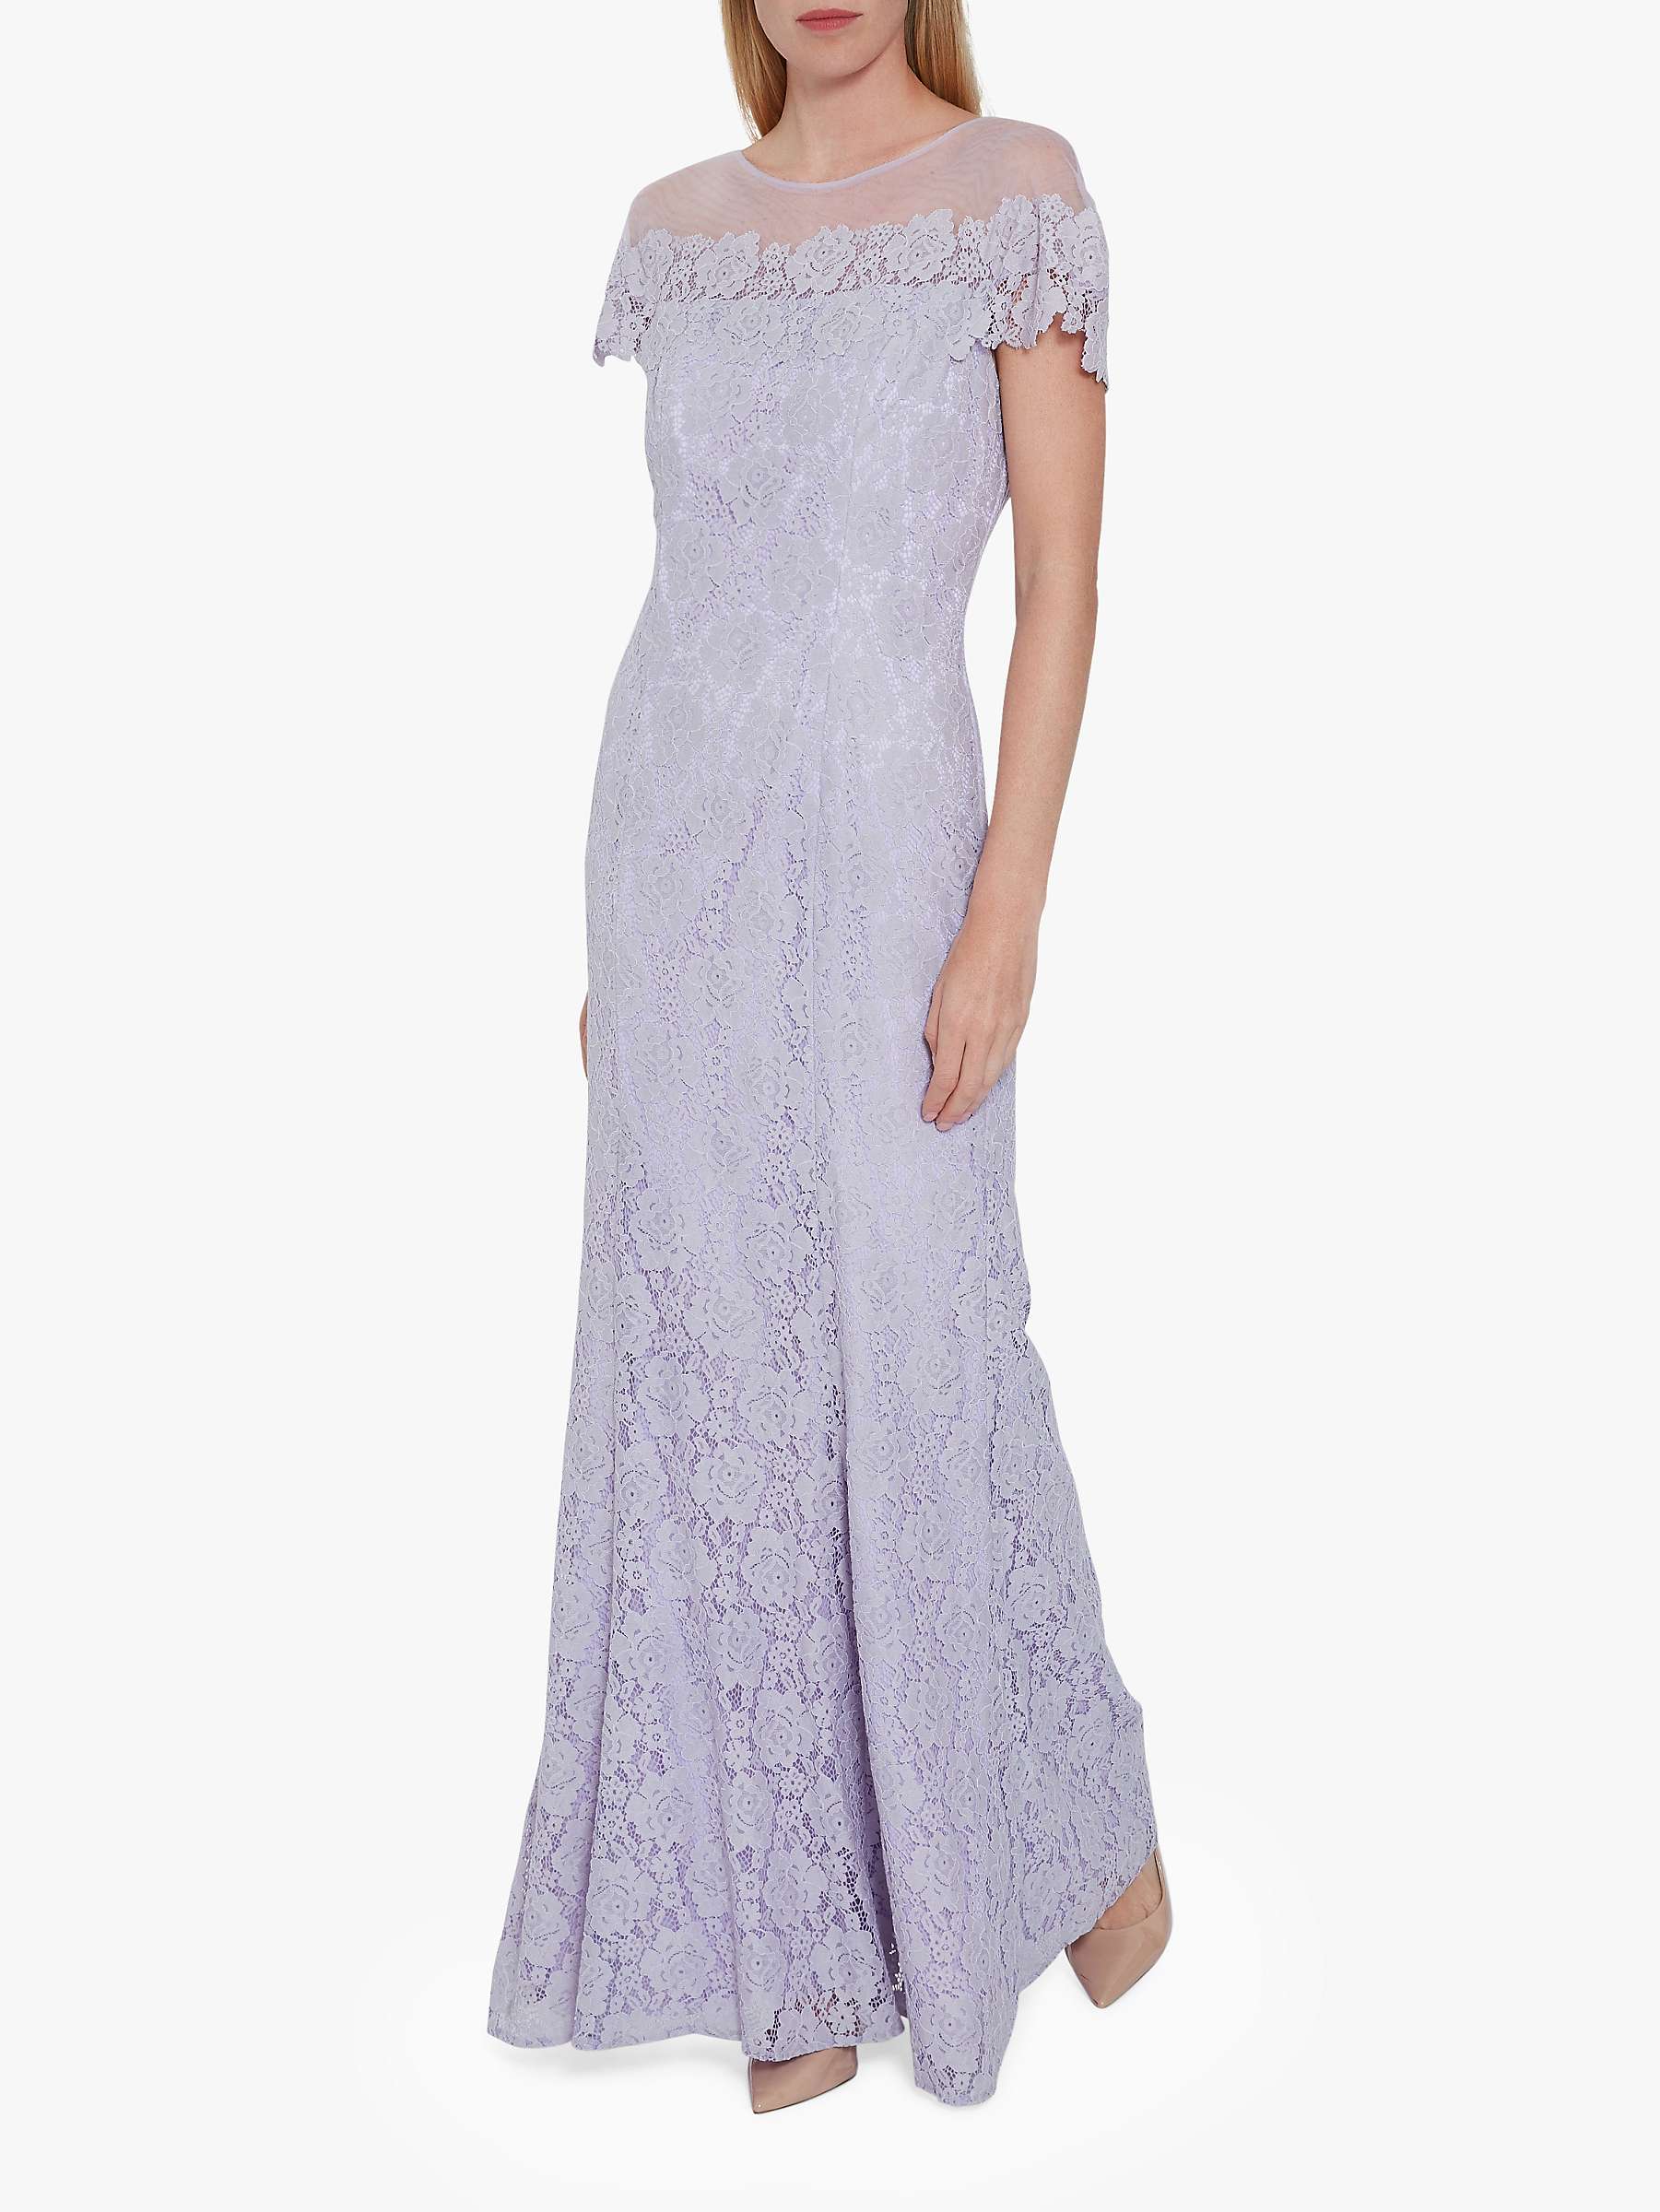 Buy Gina Bacconi Oriole Embroidered Lace Maxi Dress Online at johnlewis.com